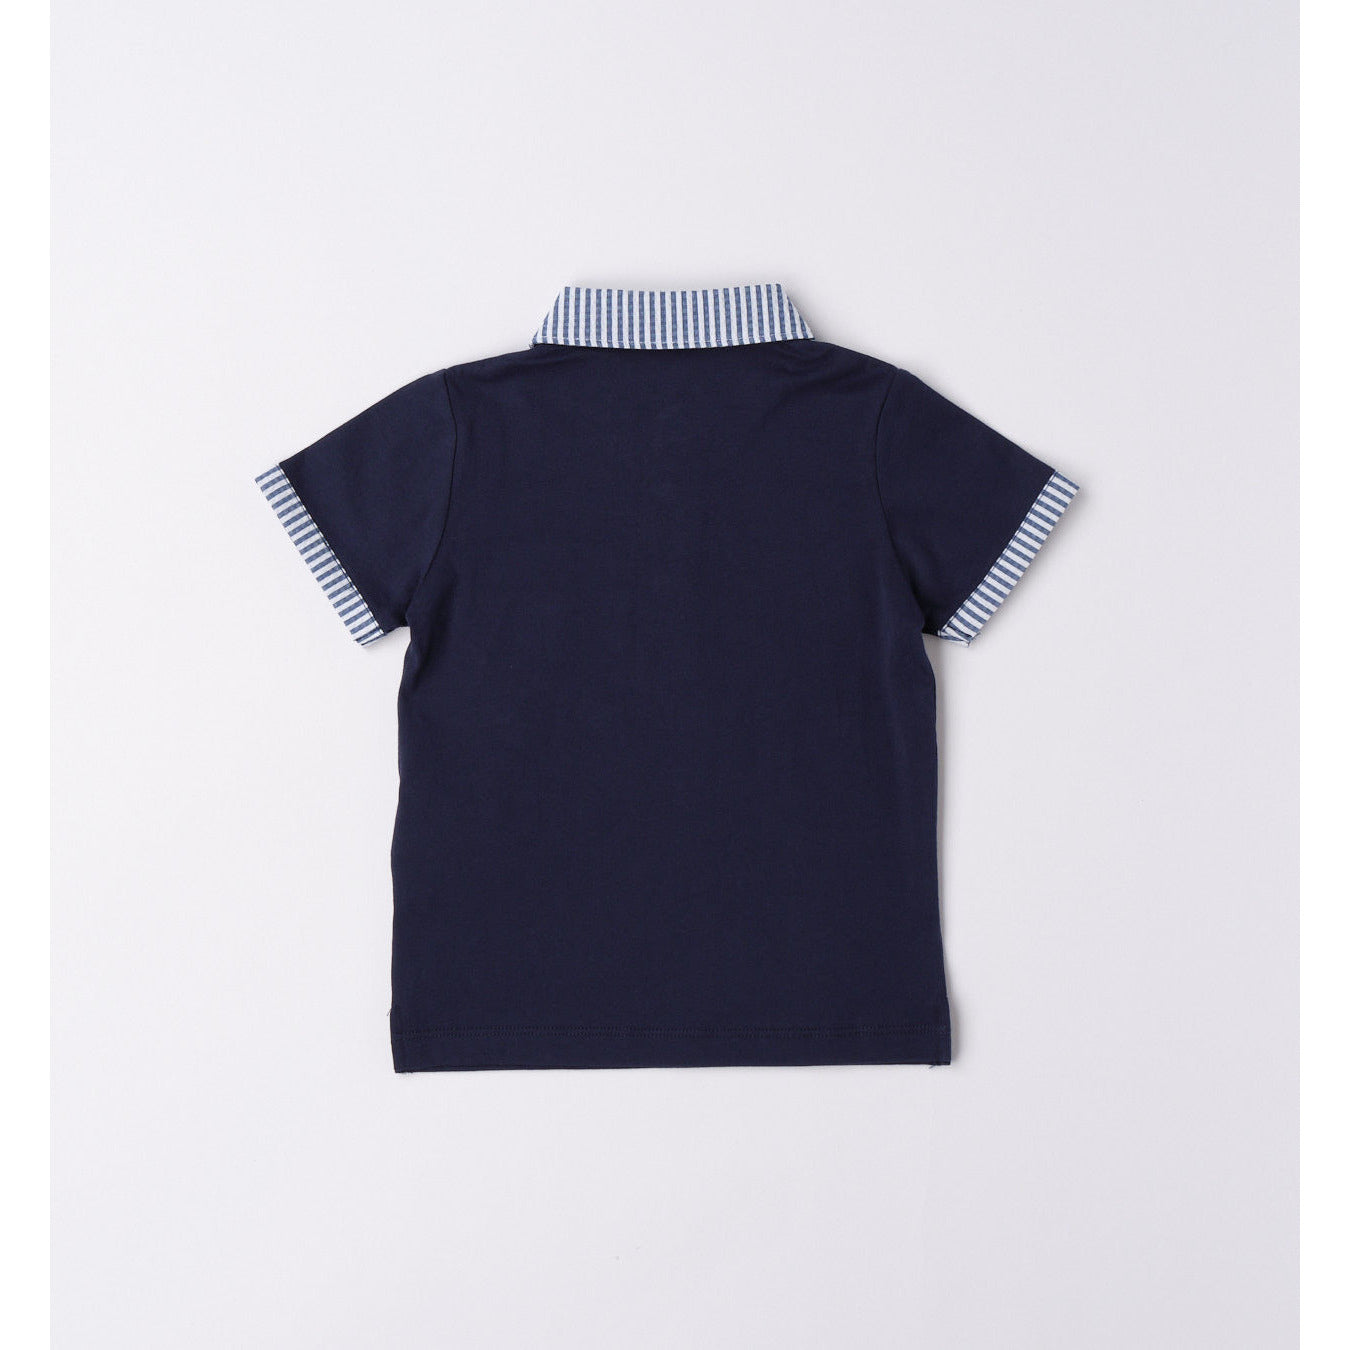 Navy and White Polo Top 101 - Lala Kids 